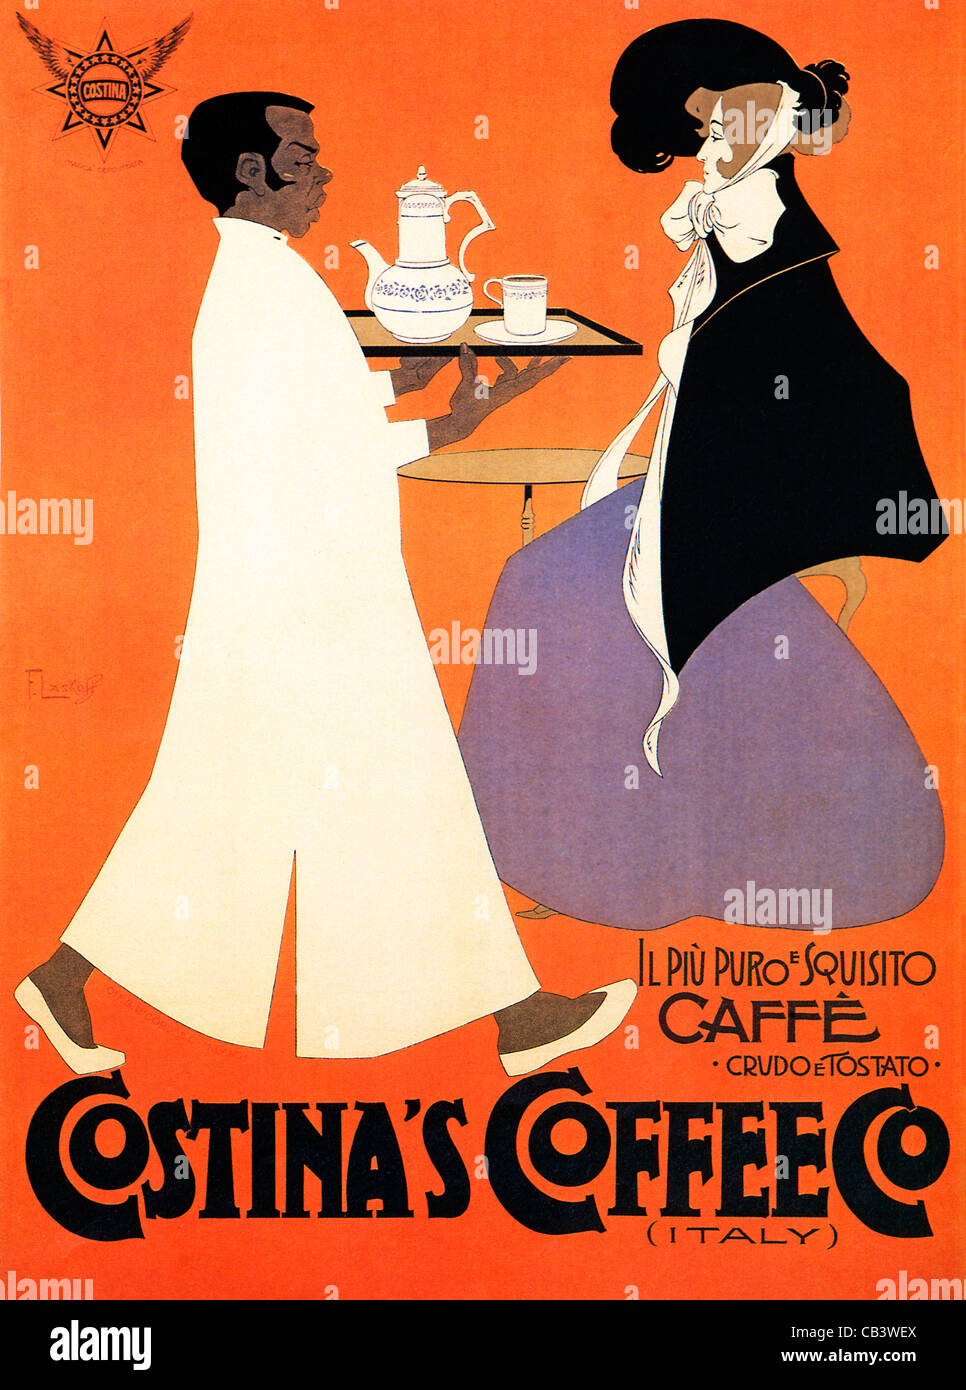 Costinas Coffee, 1901 Art Nouveau poster by Franz Laskoff for the Italian company, the purest and exquisite coffee Stock Photo